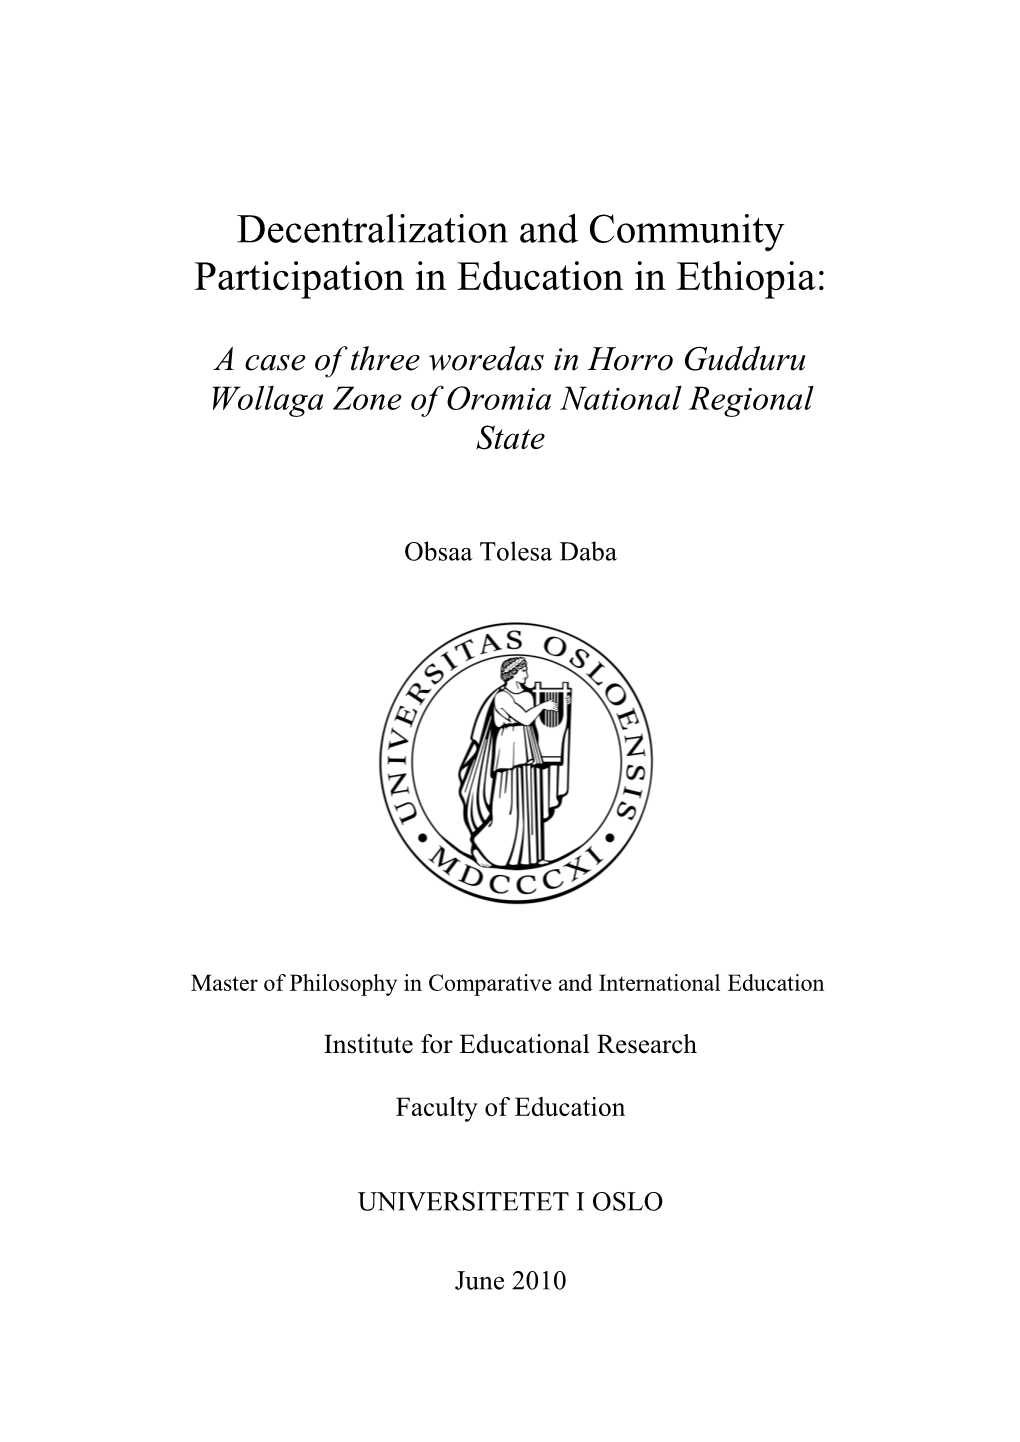 Decentralization and Community Participation in Education in Ethiopia